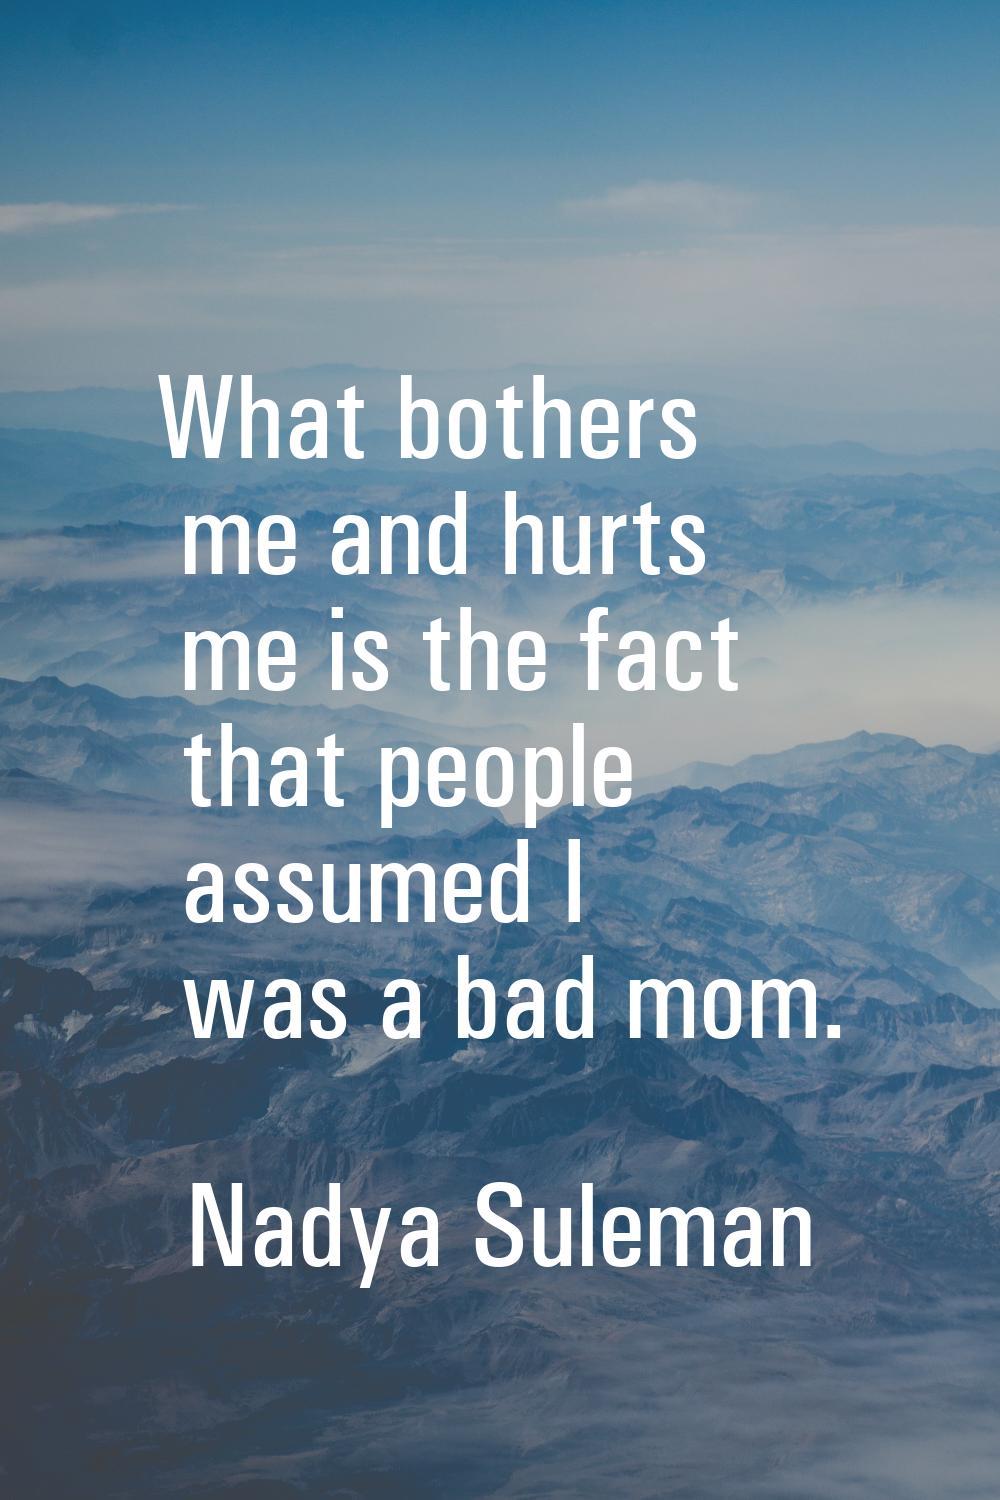 What bothers me and hurts me is the fact that people assumed I was a bad mom.